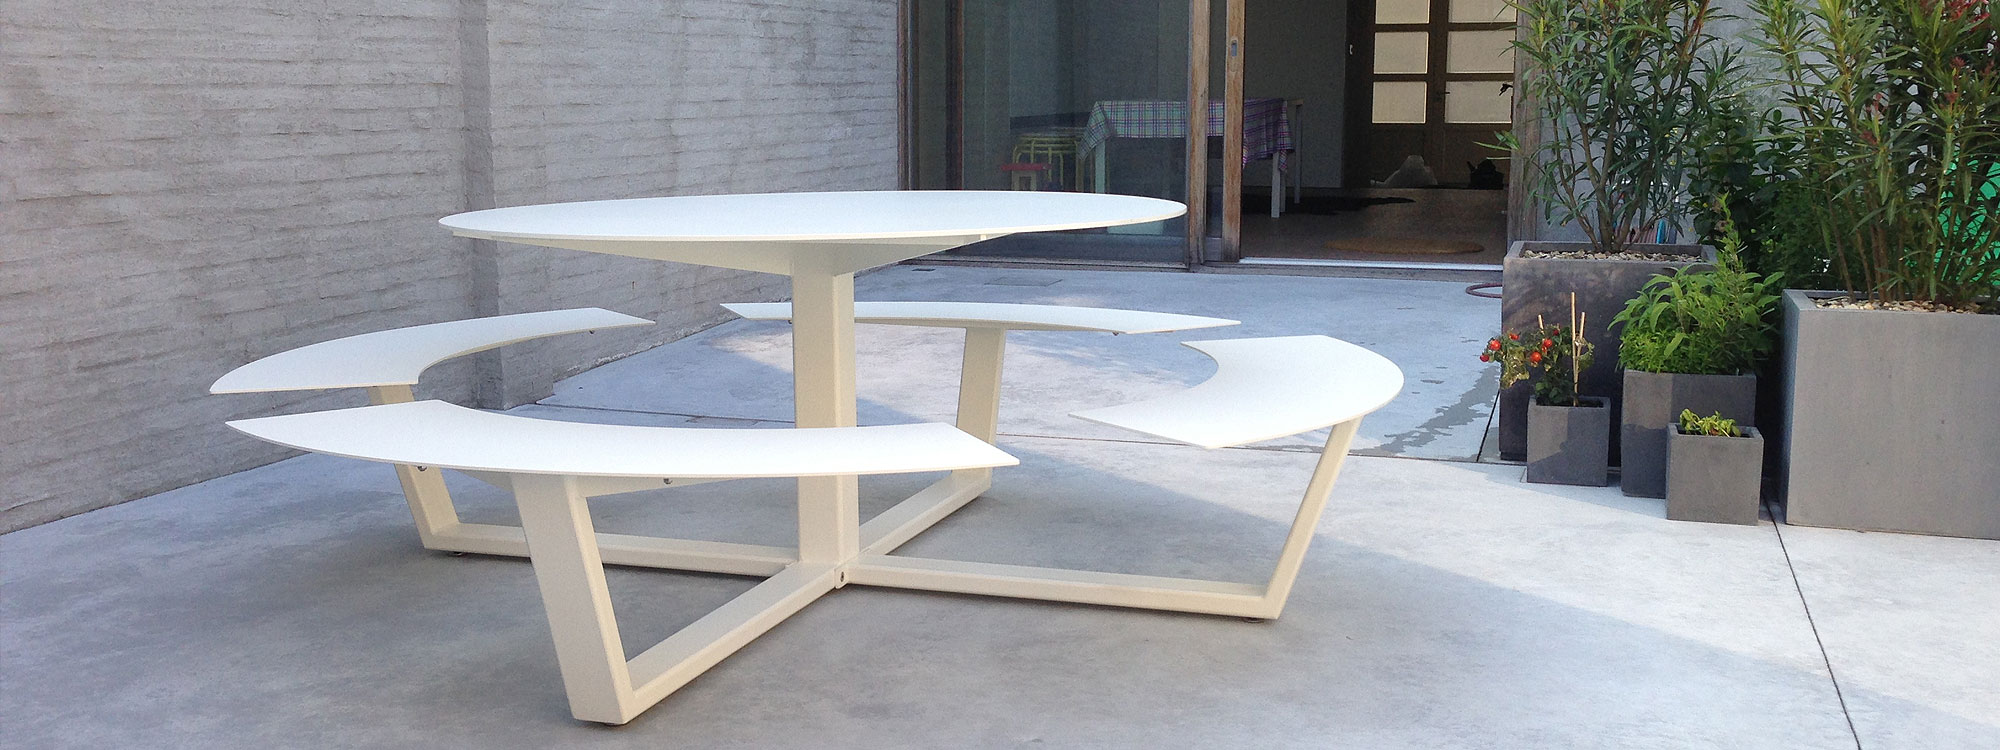 Image from side showing La Grande Ronde picnic table's modern design by Wim Segers for Cassecroute